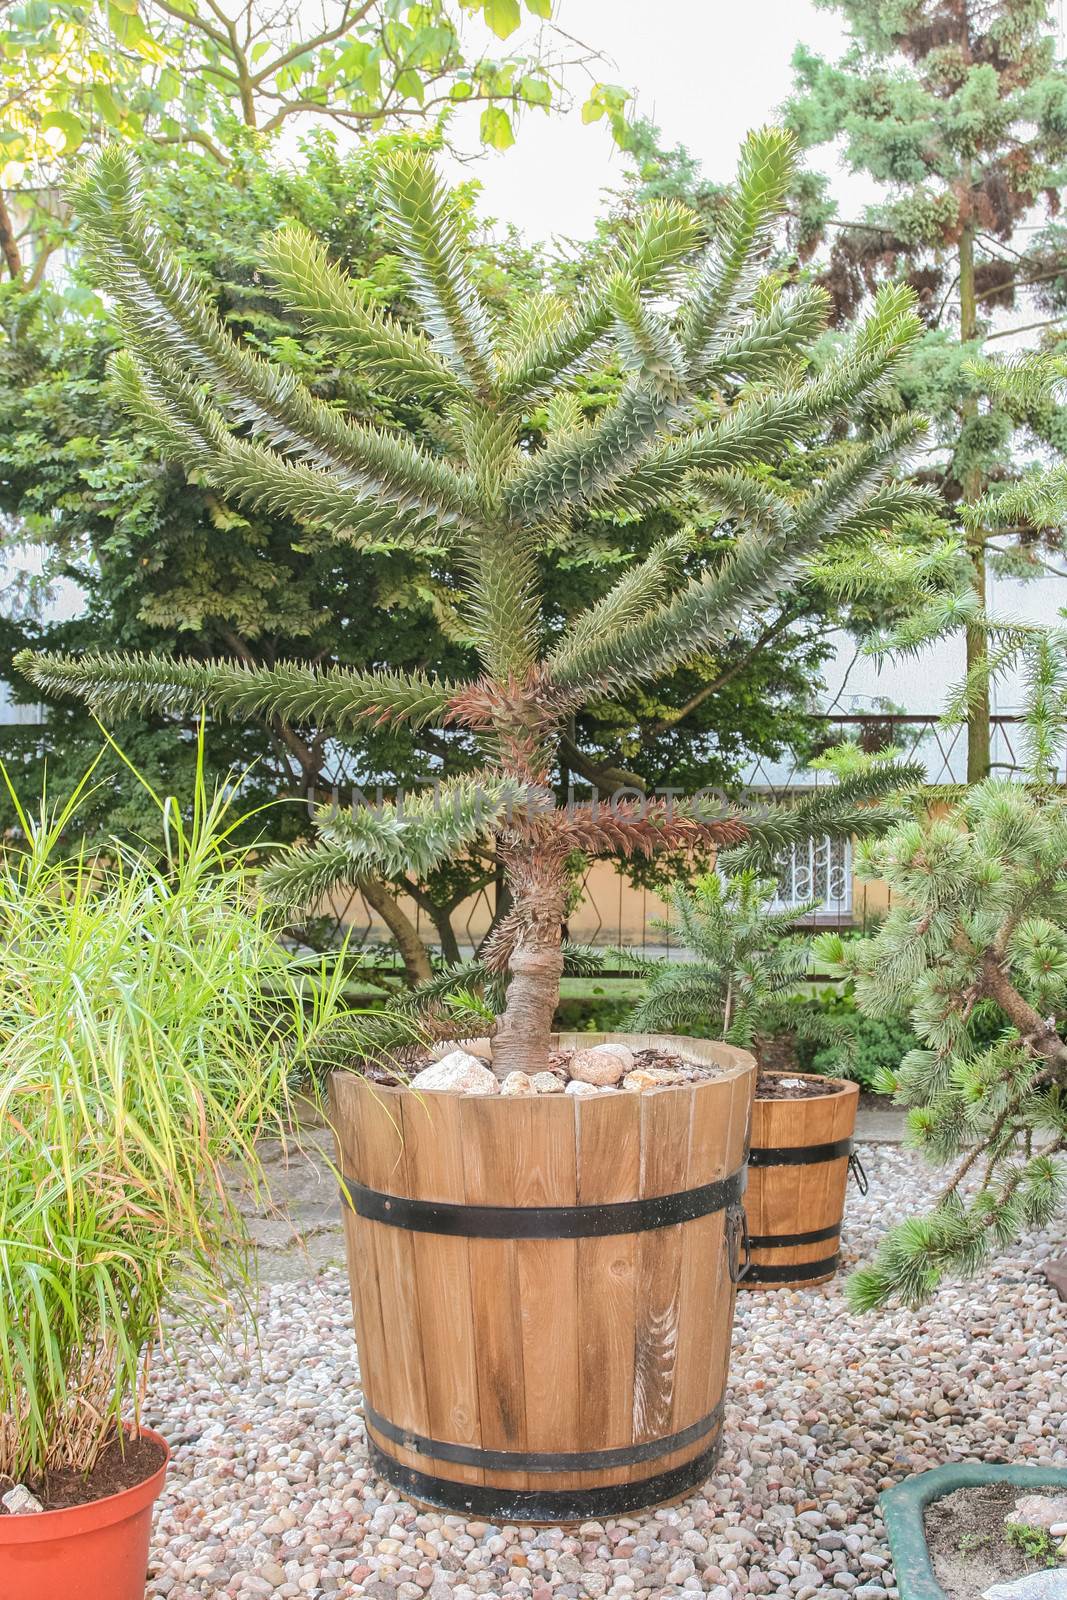 Araucaria araucana is a popular garden tree, planted for its unusual effect of the thick, 'reptilian' branches with a very symmetrical appearance.